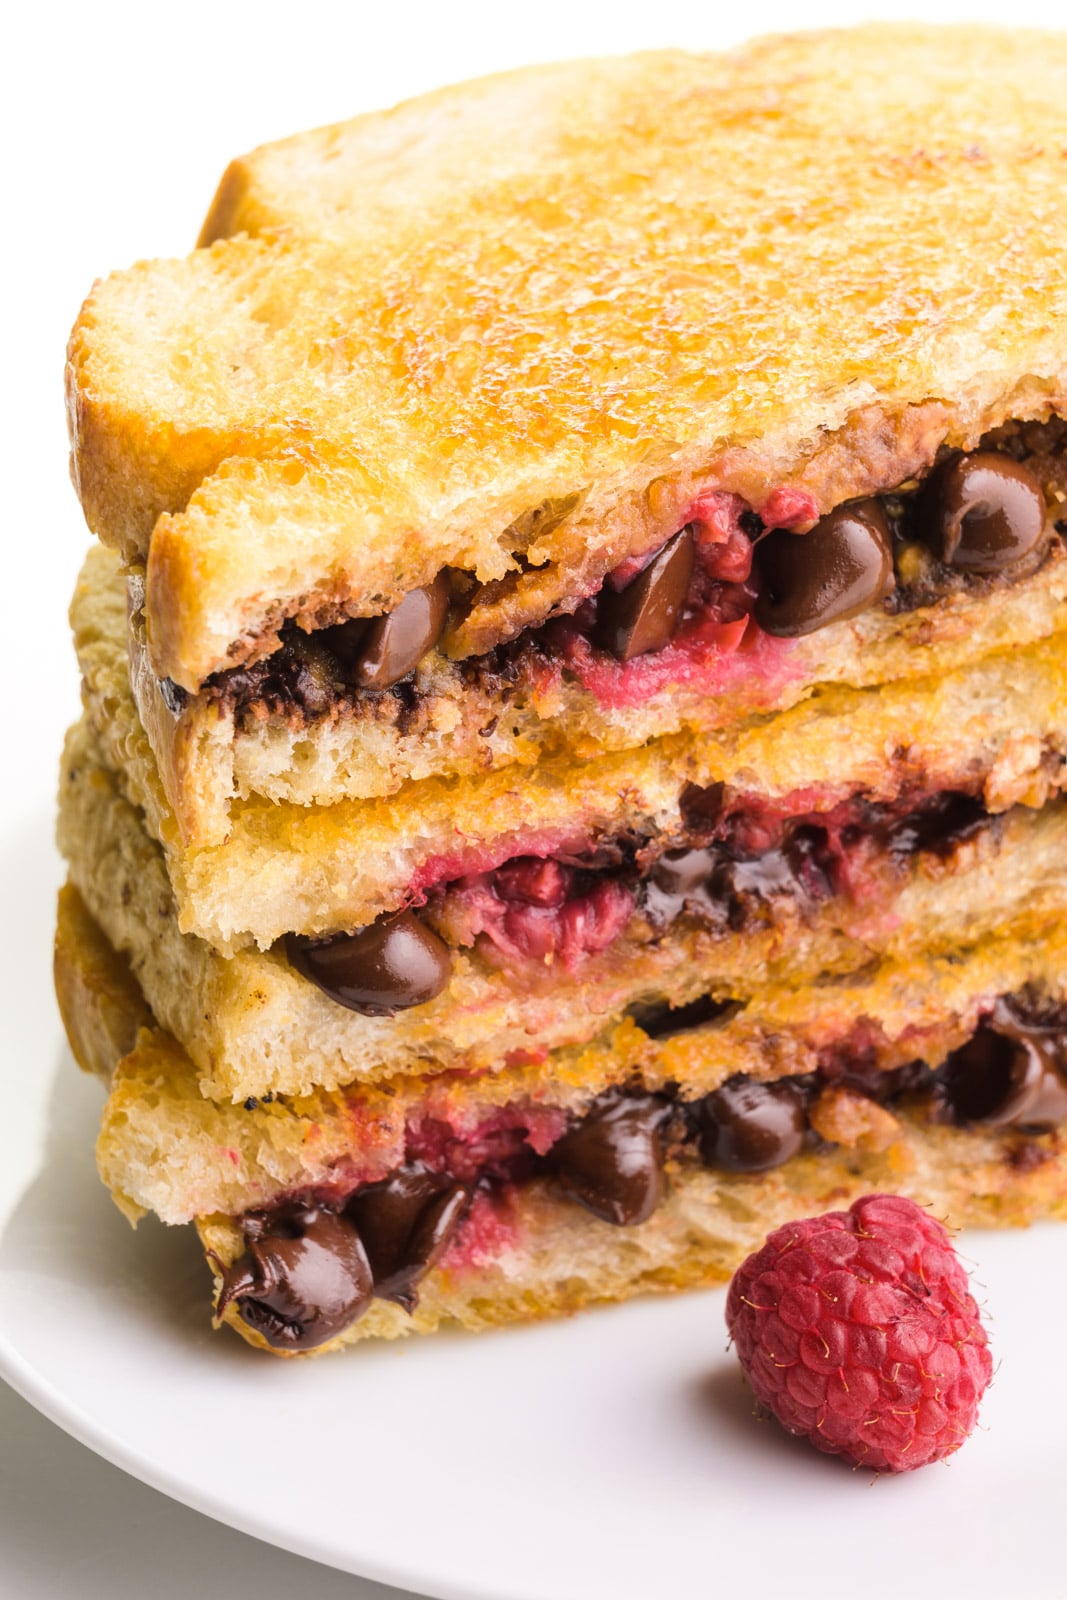 A stack of three chocolate grilled sandwiches shows melted chocolate chips and raspberries with a golden crust on the top slice of bread. There is a raspberry sitting in front of the stack.